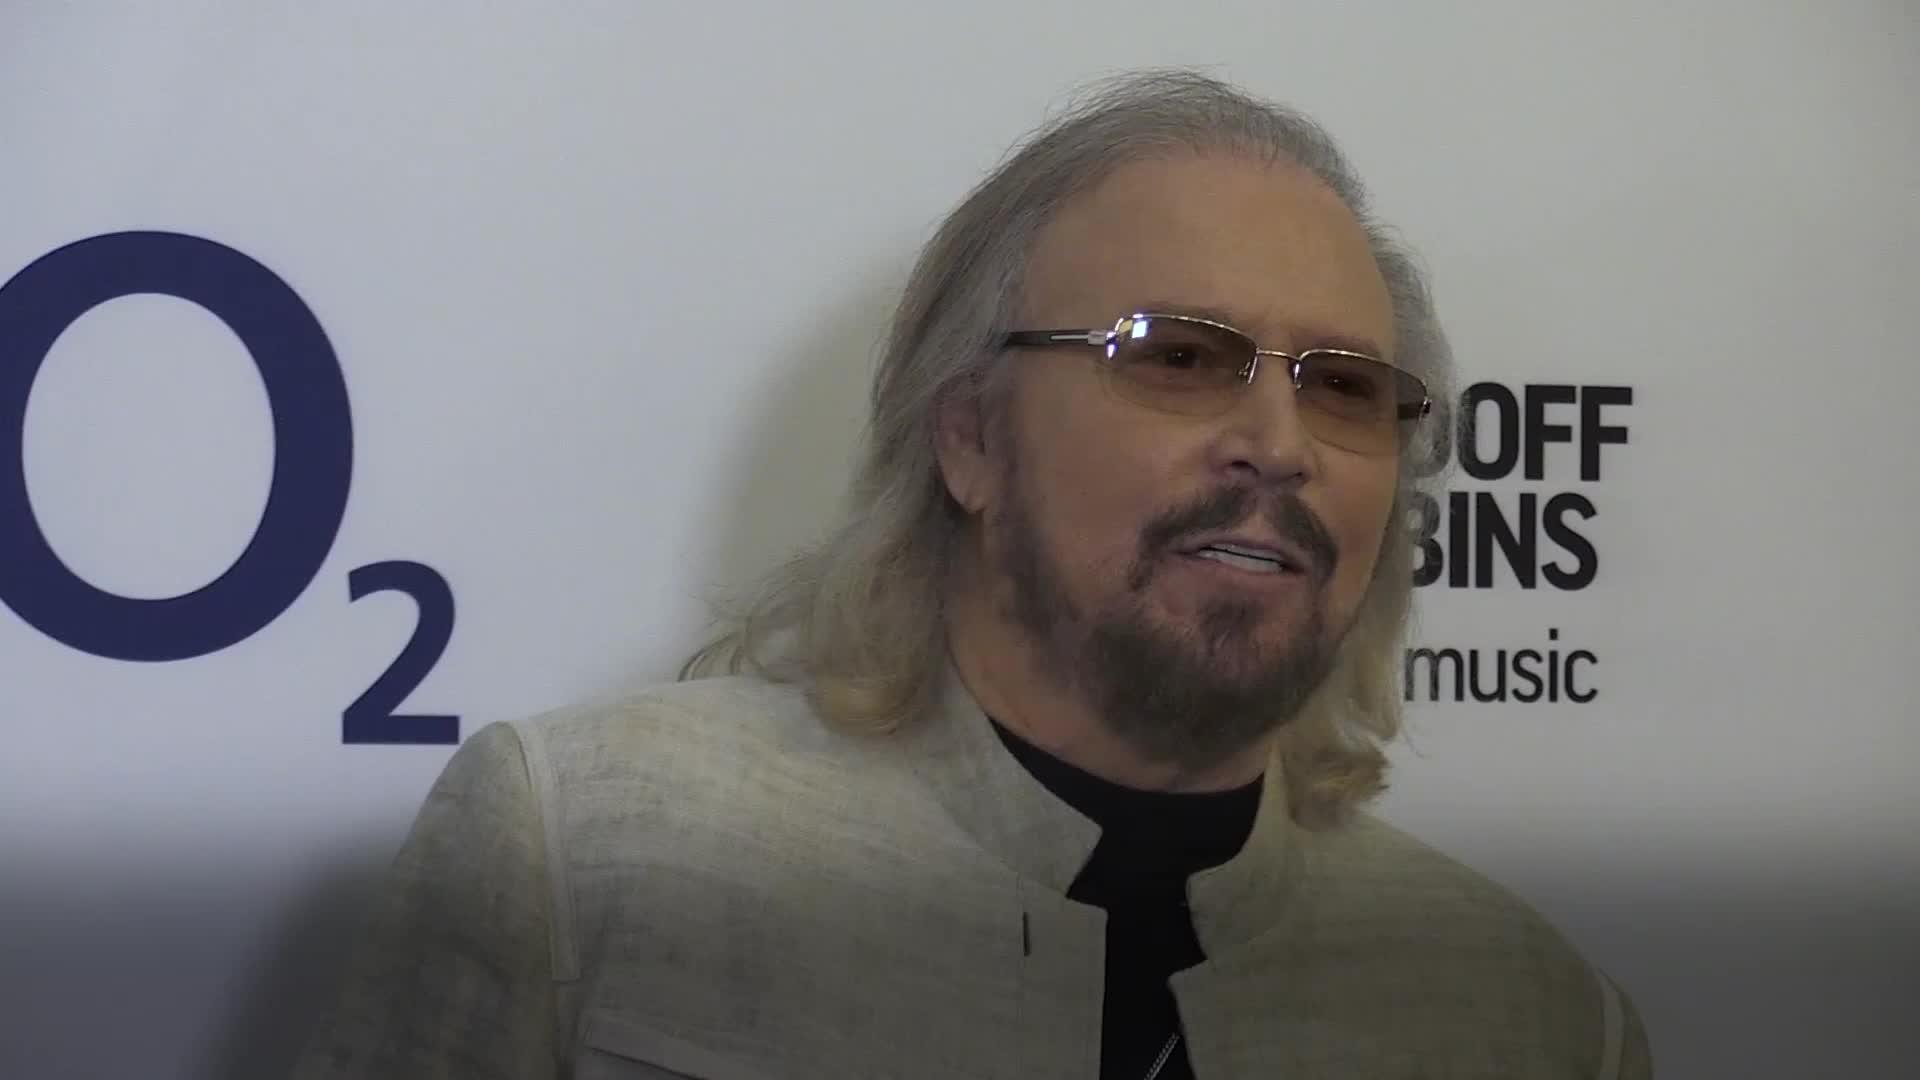 Bee Gees star Barry Gibb hopes child abuse revelations will help